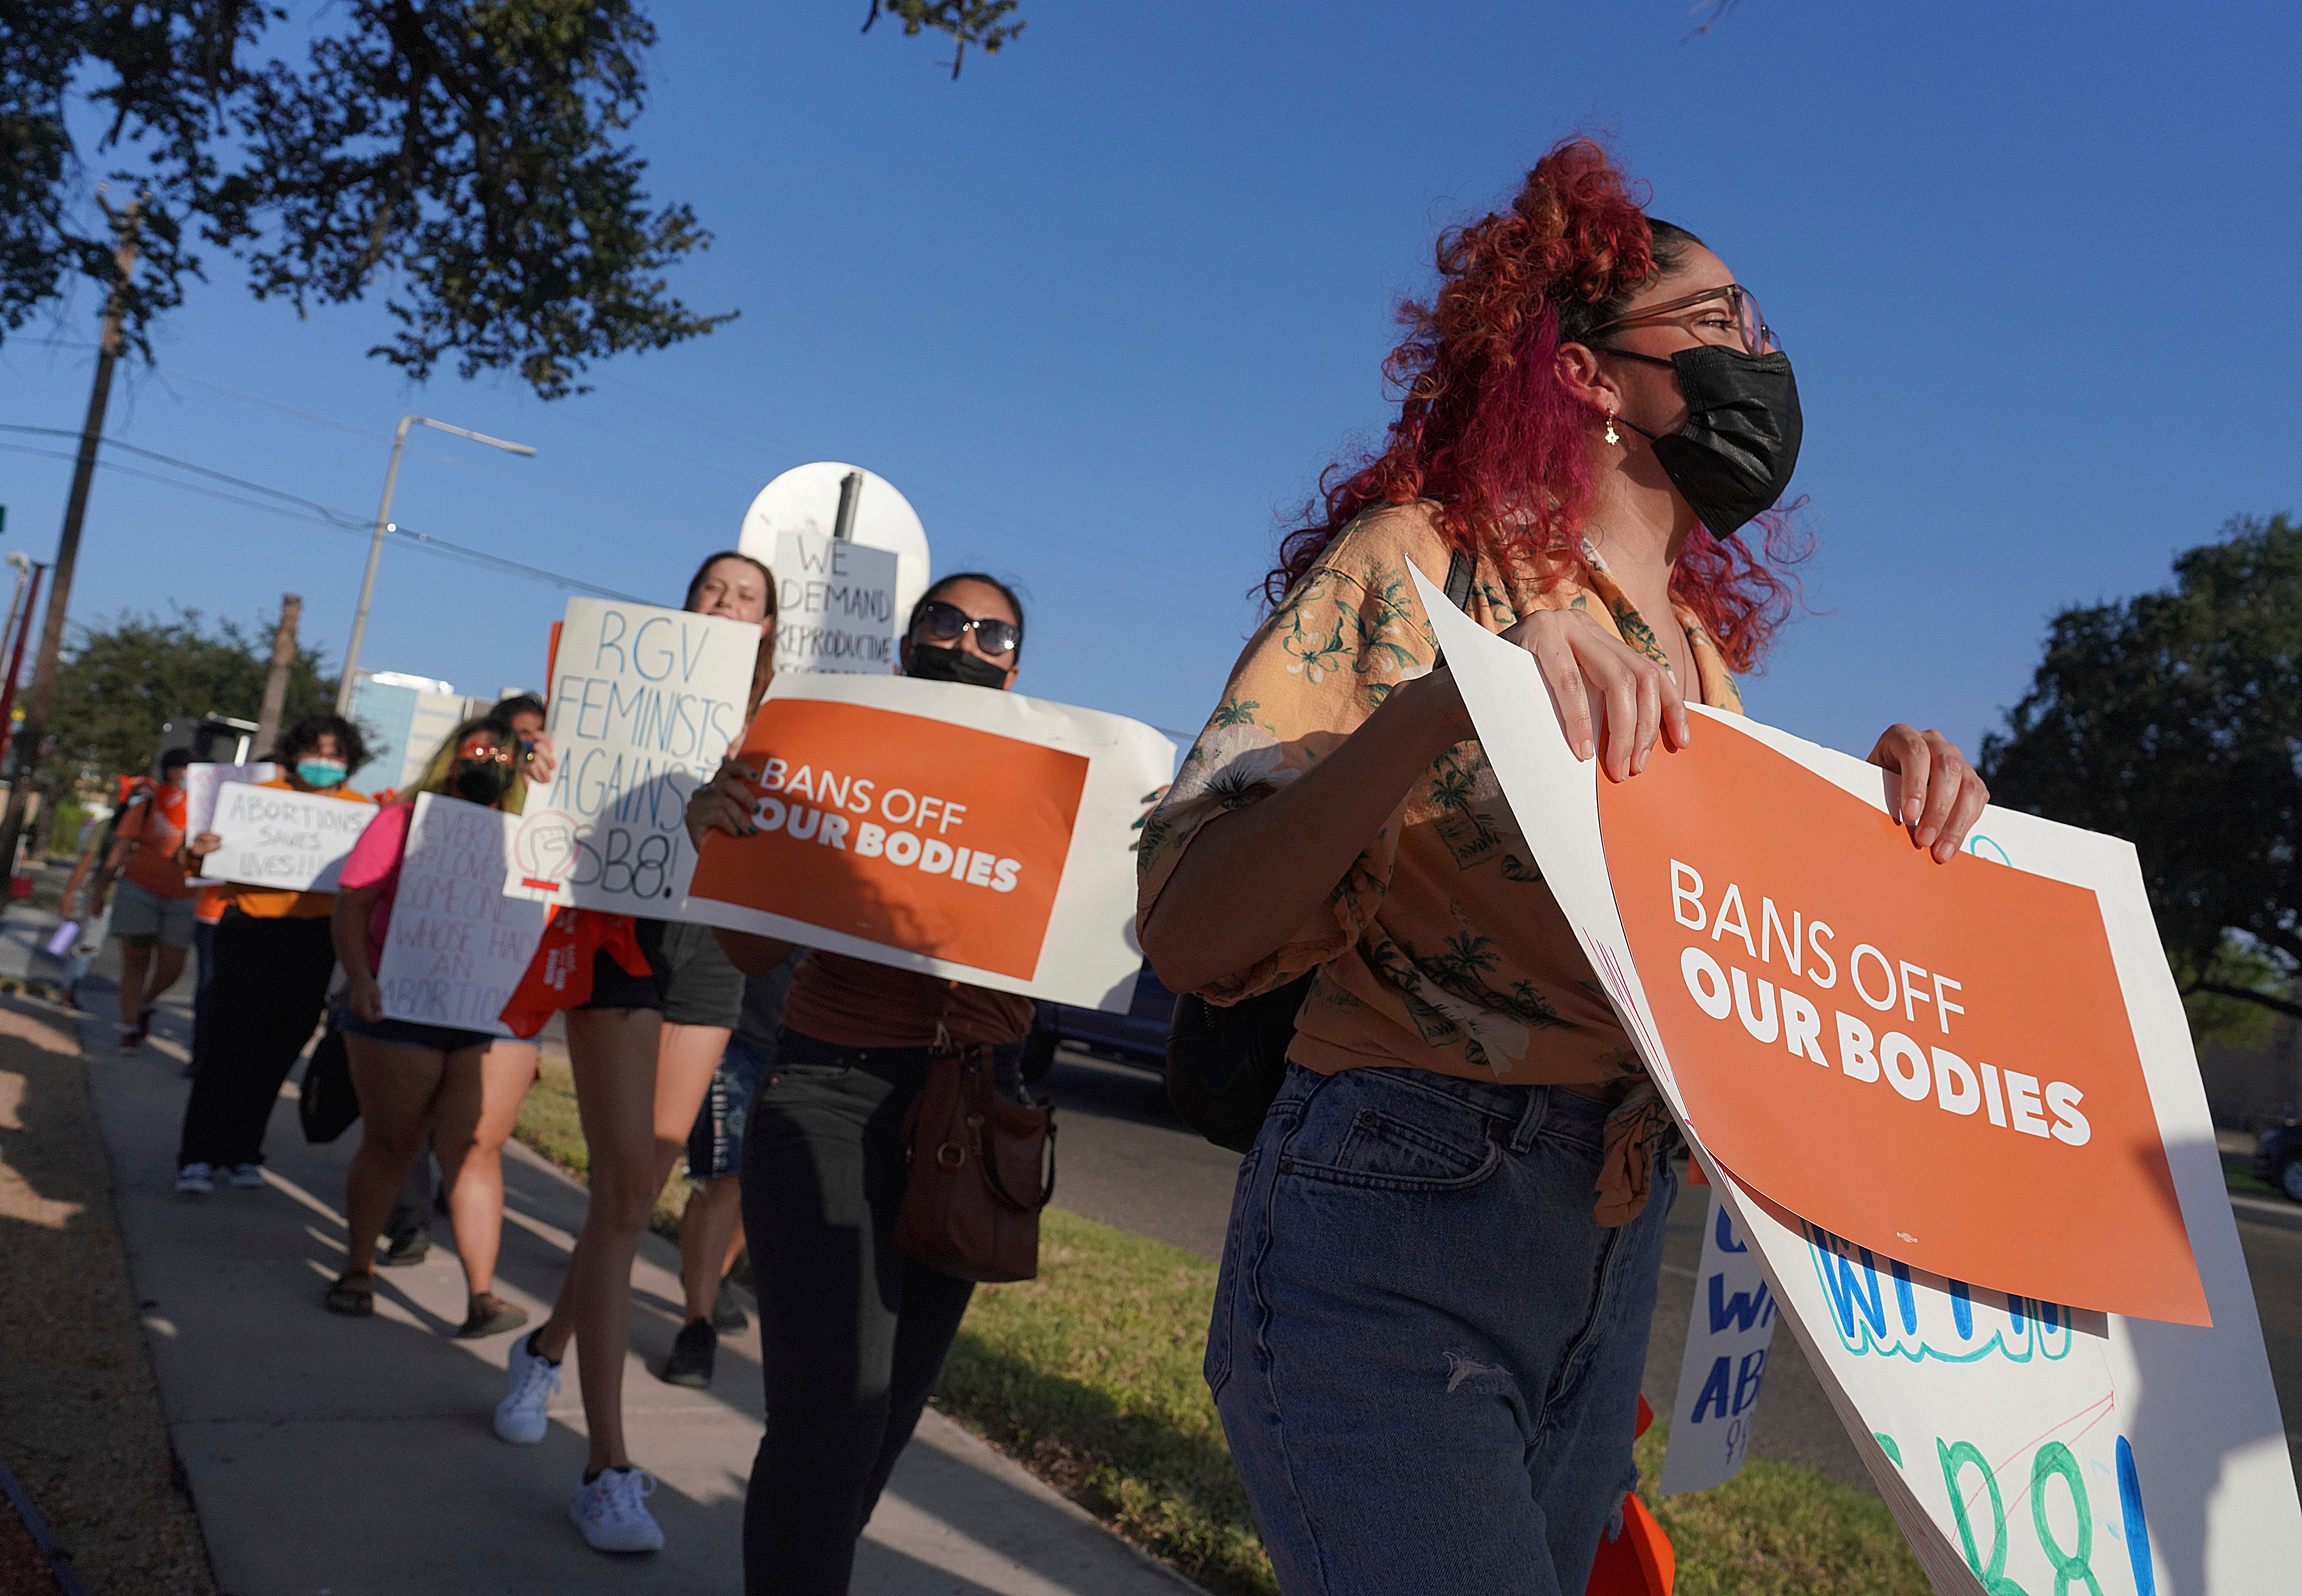 Abortion rights supporters gather to protest Texas abortion law in Edinburg, Texas